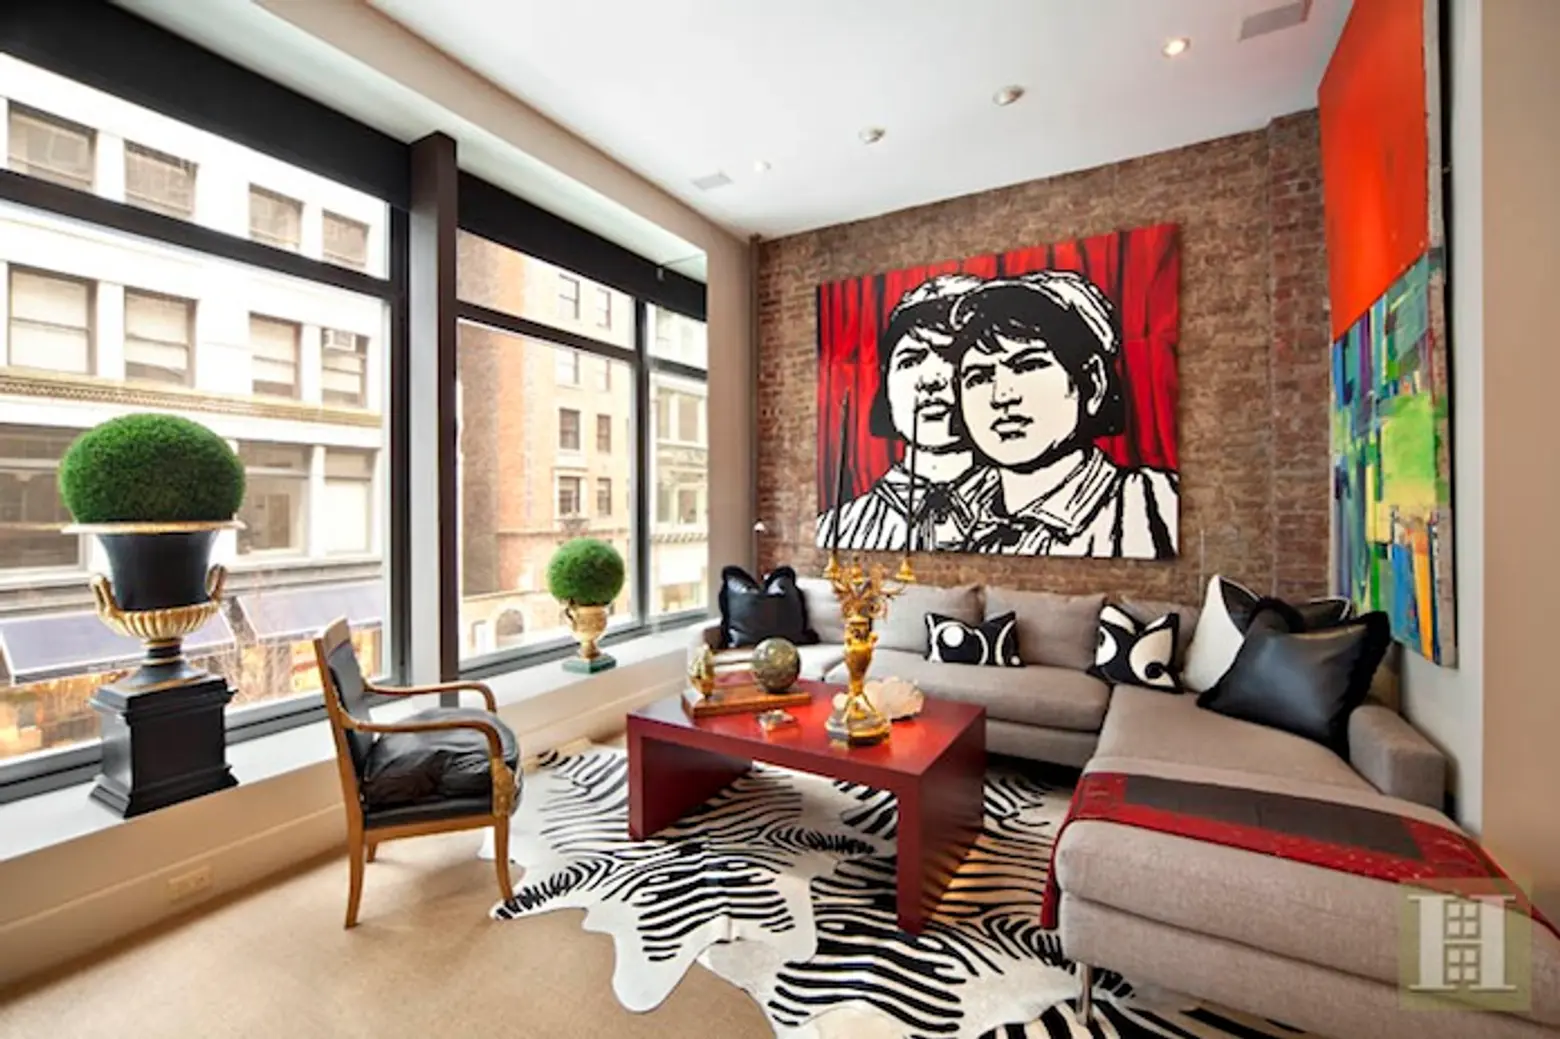 Lofty Greenwich Village Condo Offers Plenty of Space to Show Off Your Art